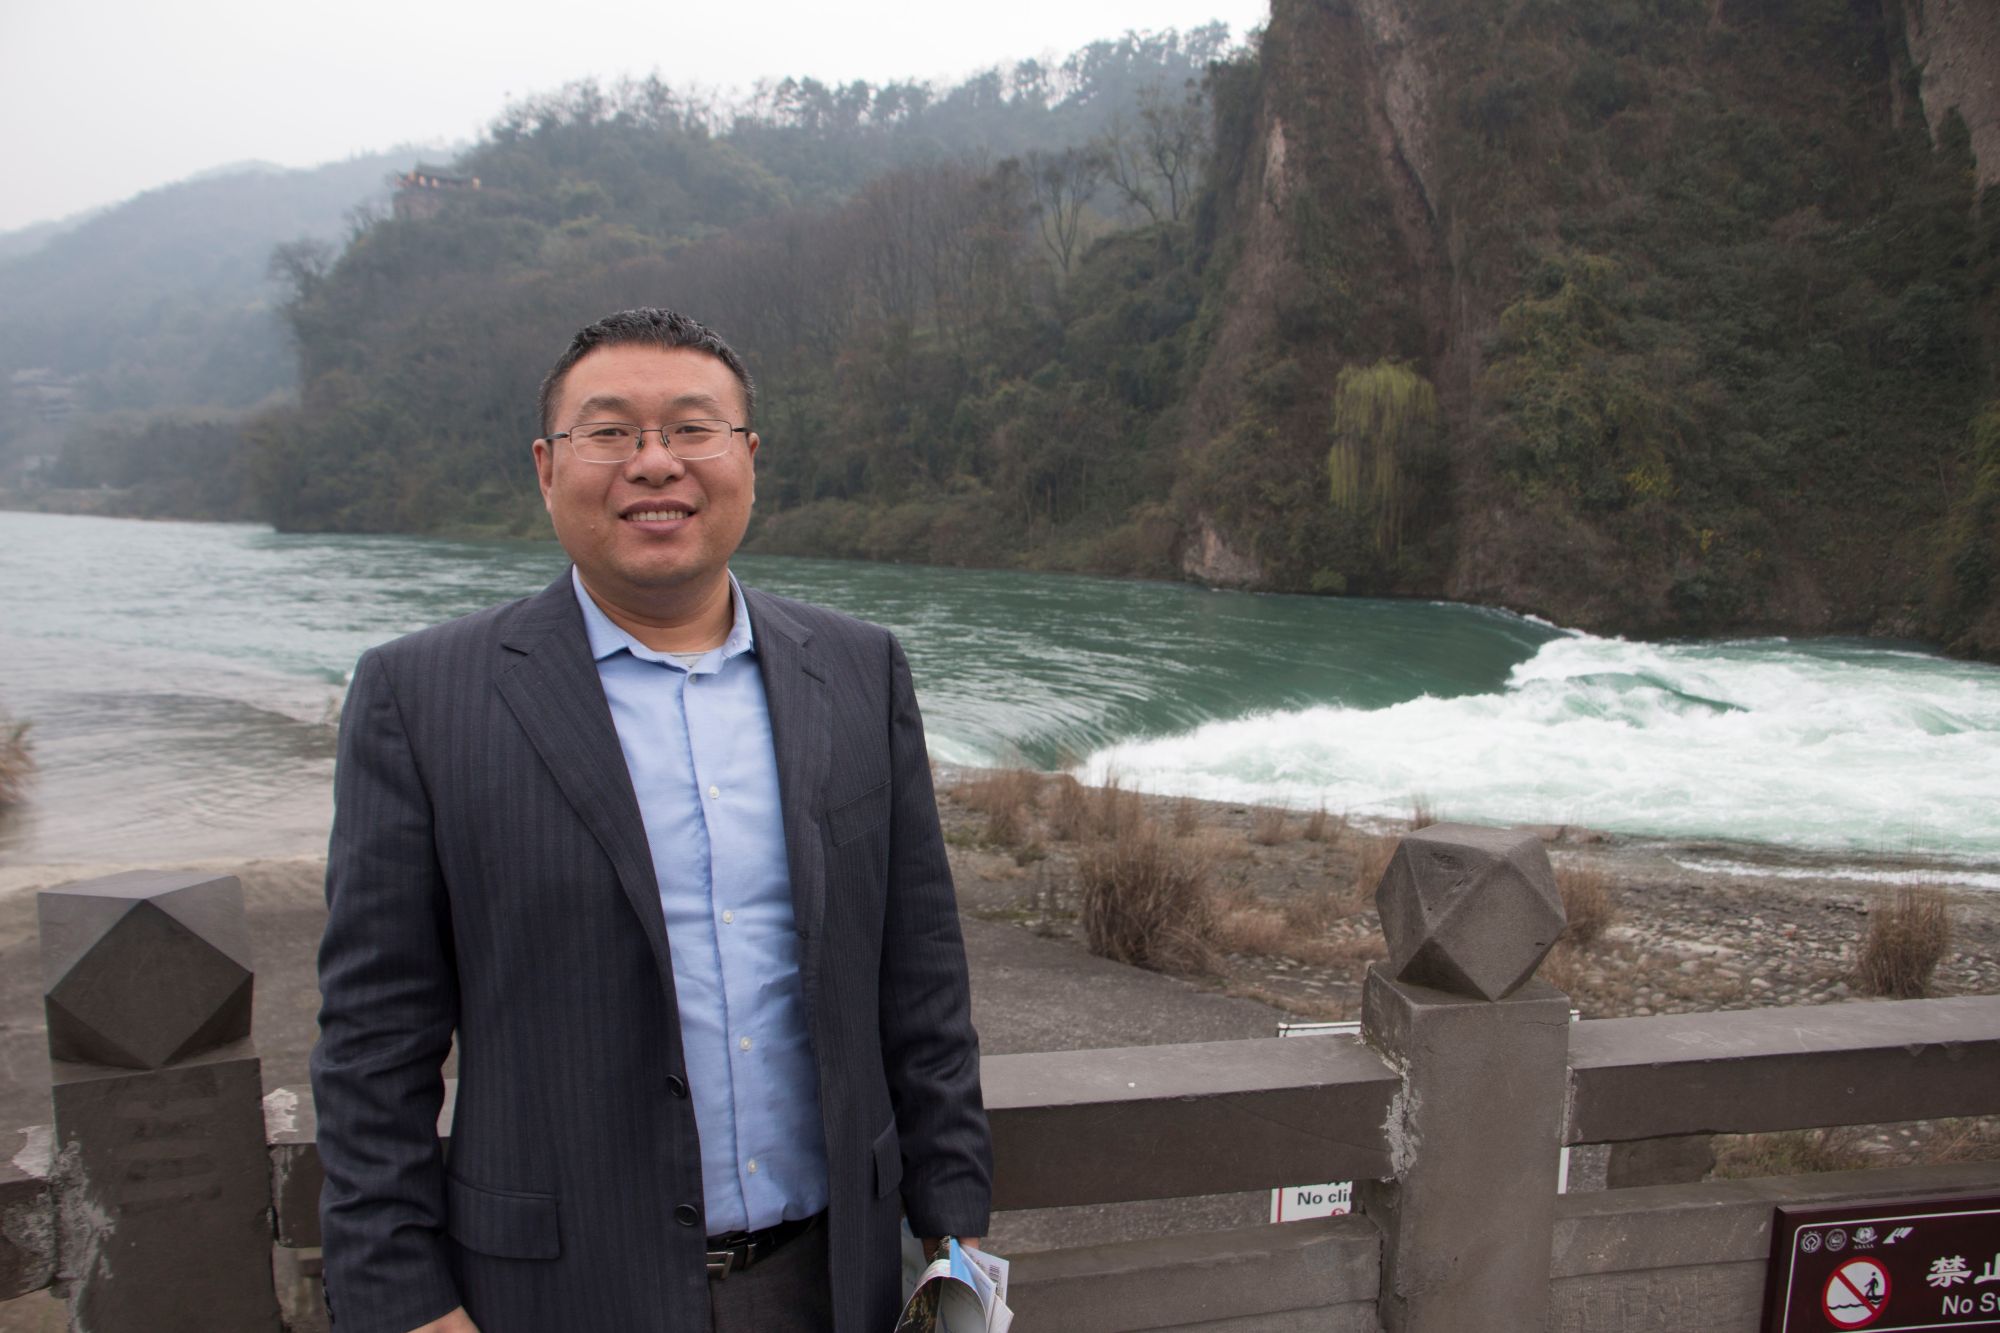 Professor Liu Junguo Awarded by the International Society for the Study of Restoration Ecology